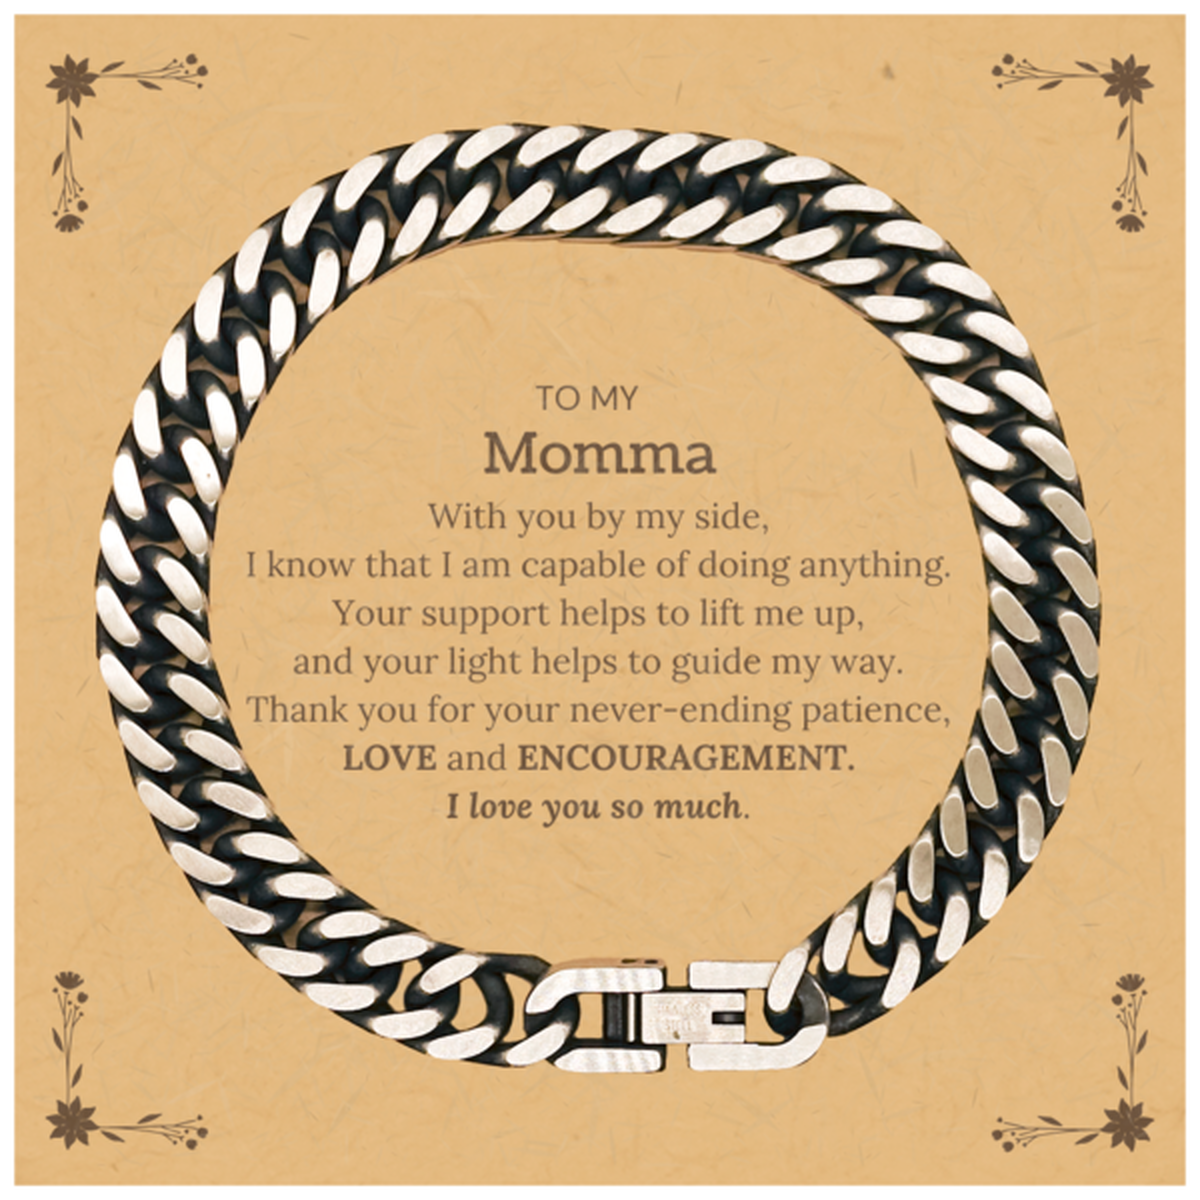 Appreciation Momma Cuban Link Chain Bracelet Gifts, To My Momma Birthday Christmas Wedding Keepsake Gifts for Momma With you by my side, I know that I am capable of doing anything. I love you so much